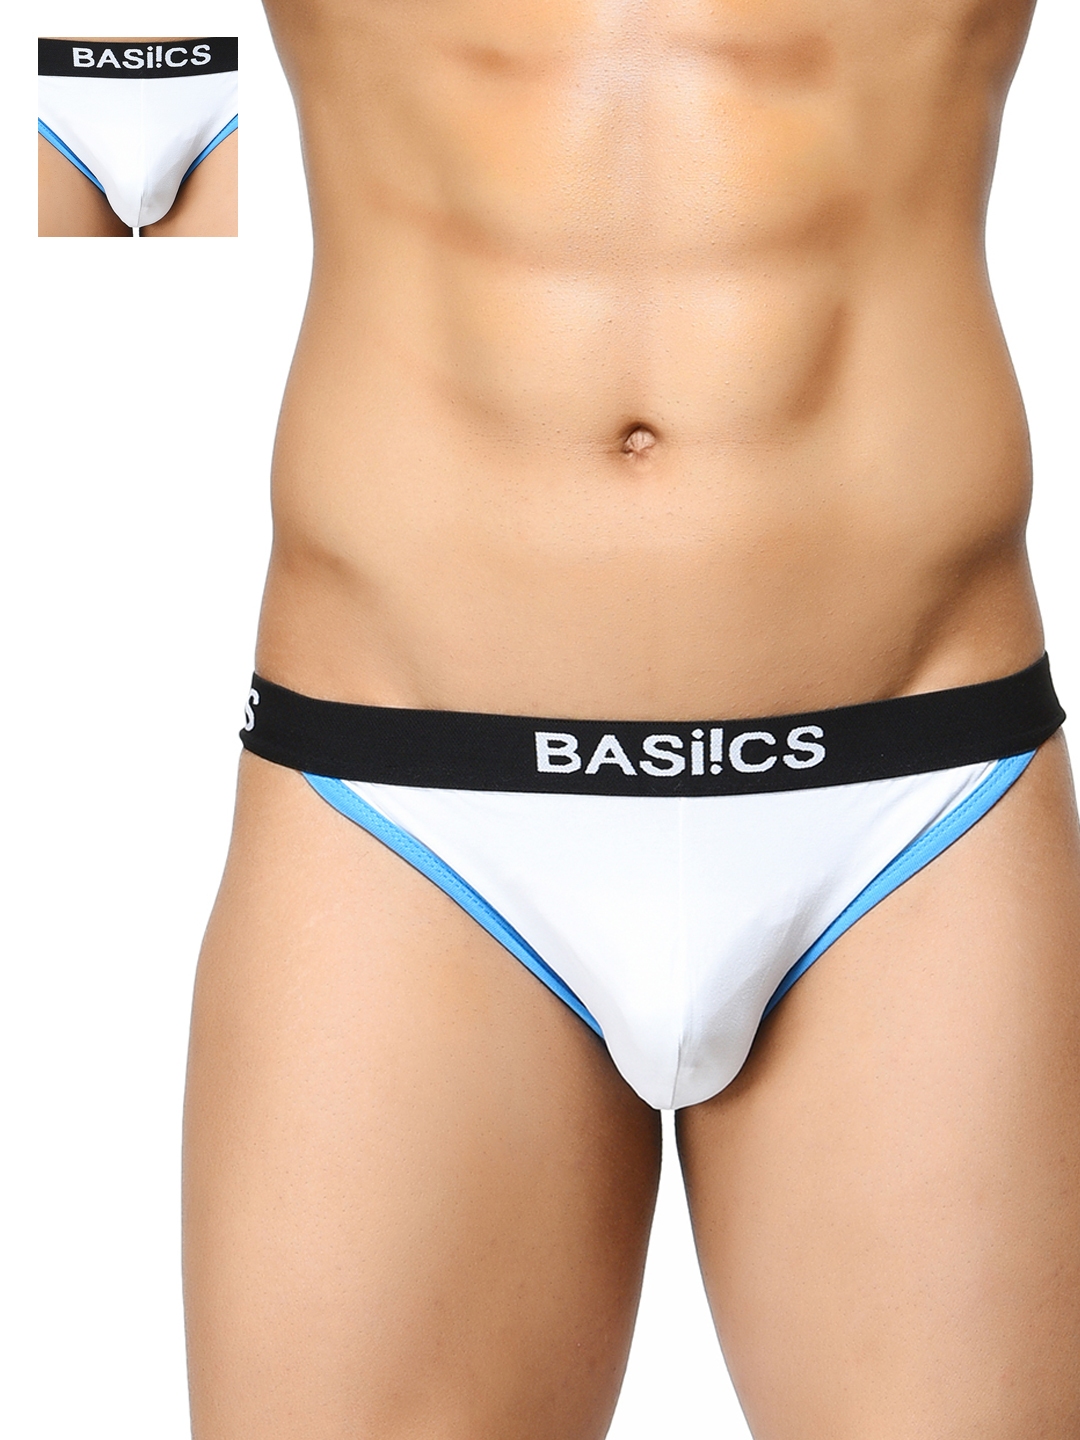 BASIICS by La Intimo Men Pack of 3 White Briefs